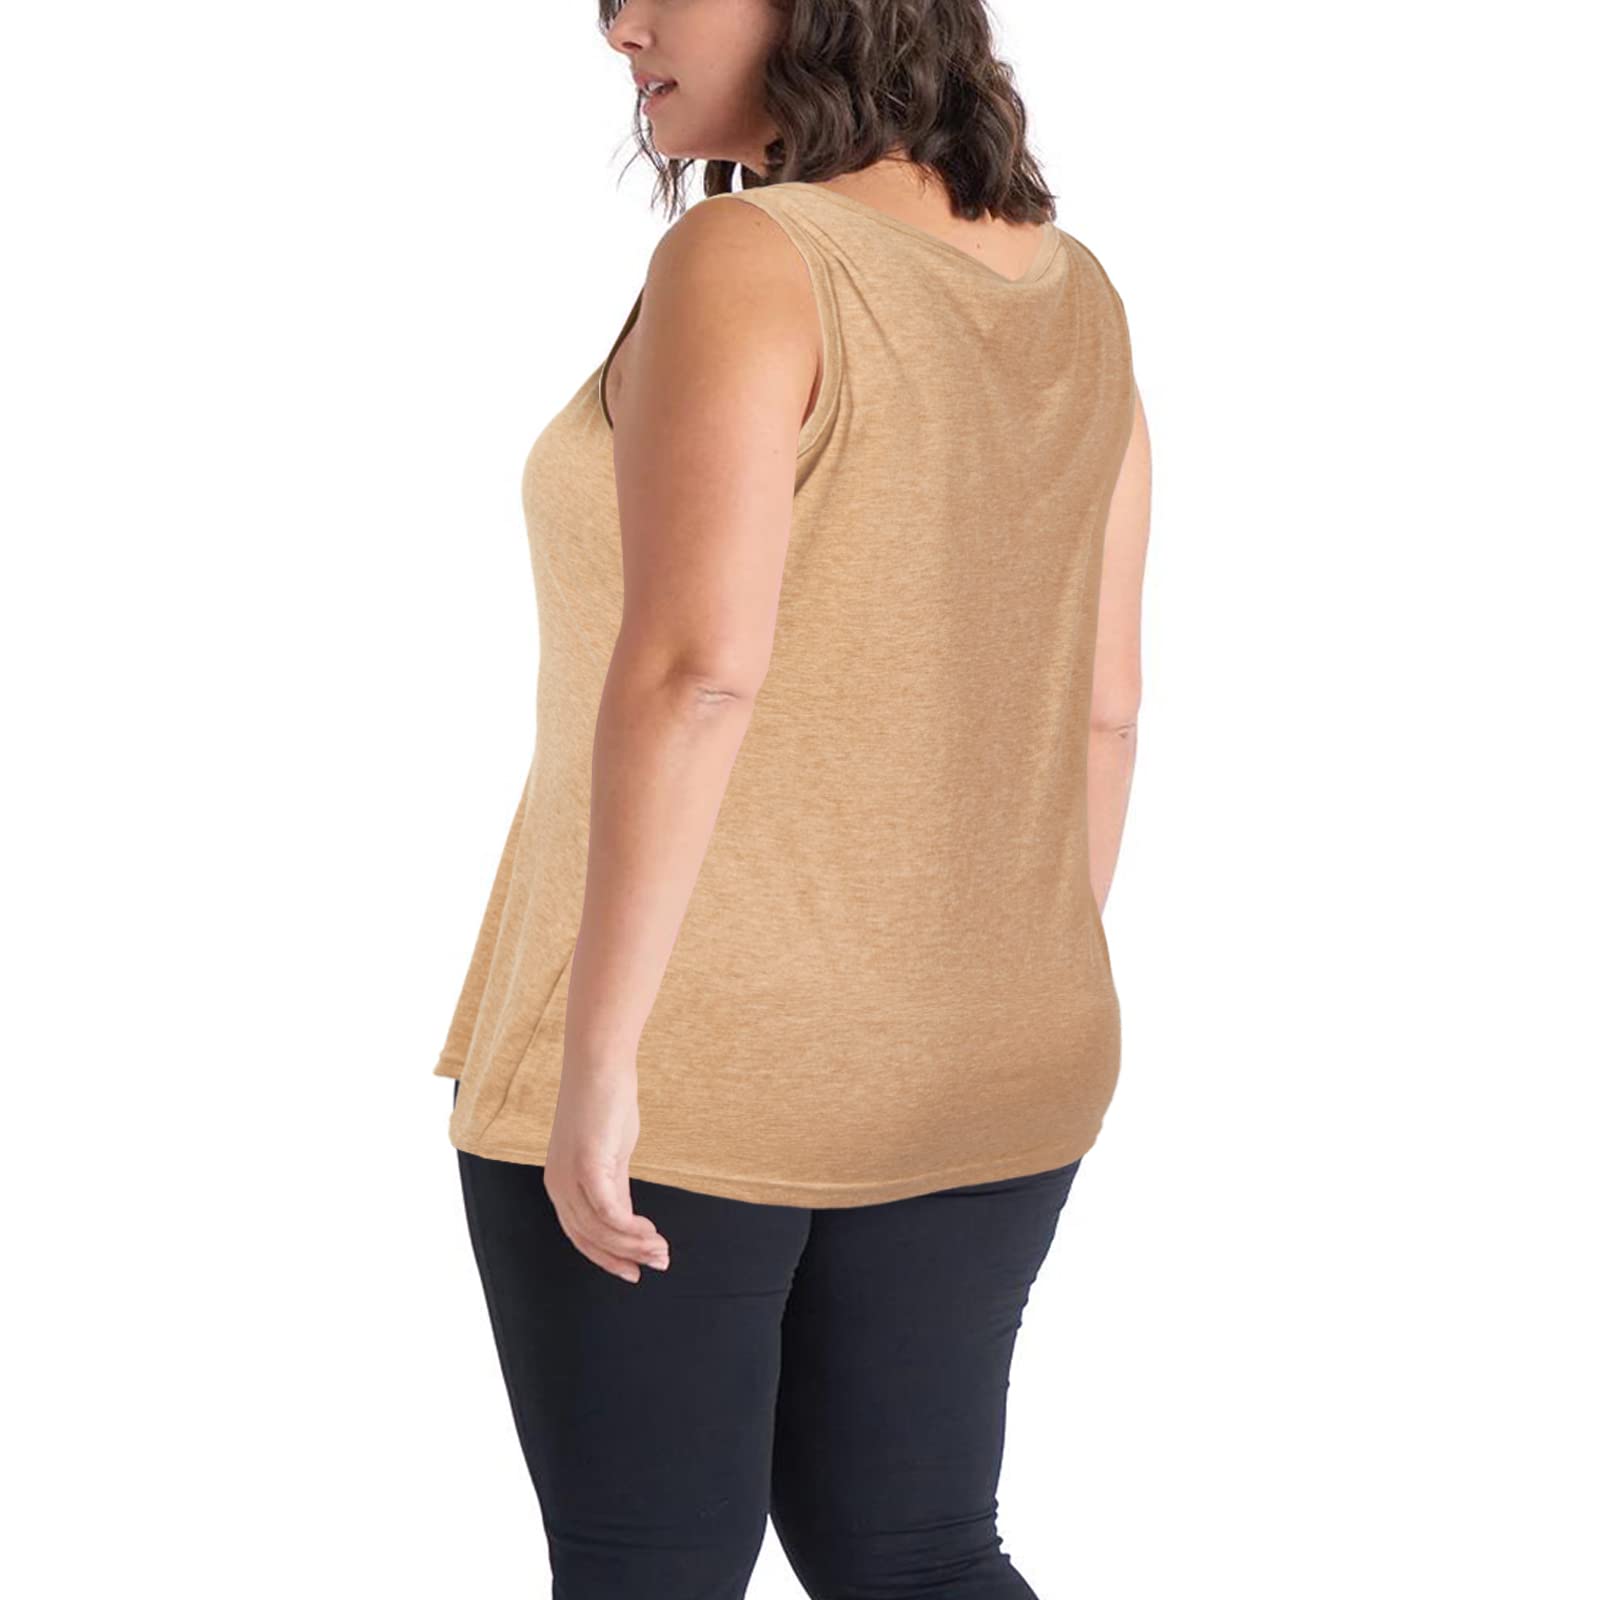 Plus Size Tank Tops for Women Summer Sleeveless T-Shirts Loose-Beige - Moon Wood